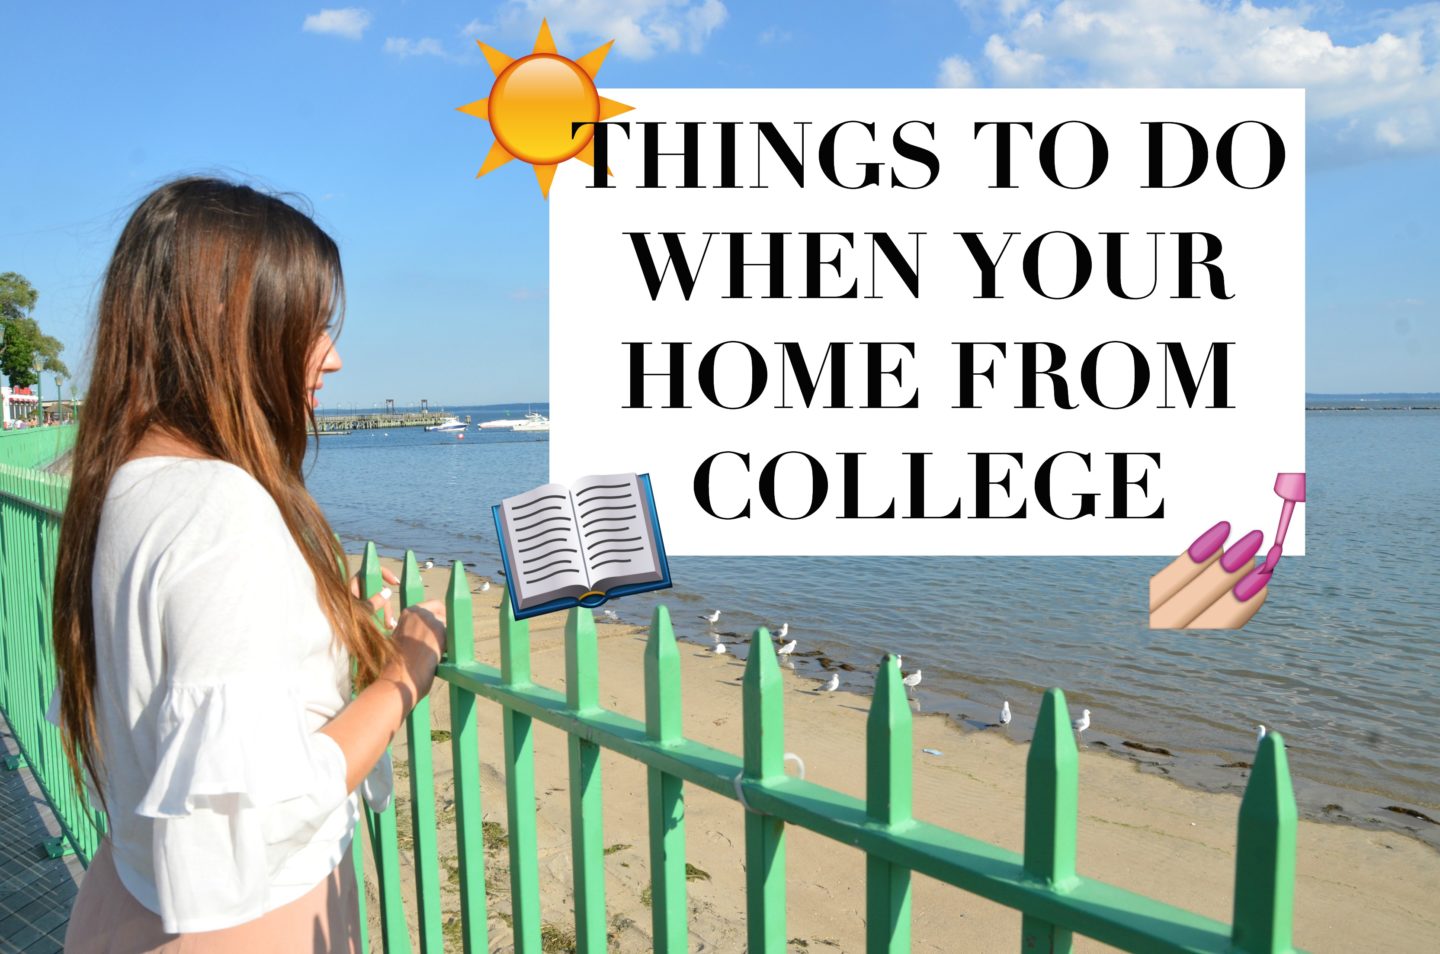 27 Things to Do When Your Home From College- VIDEO